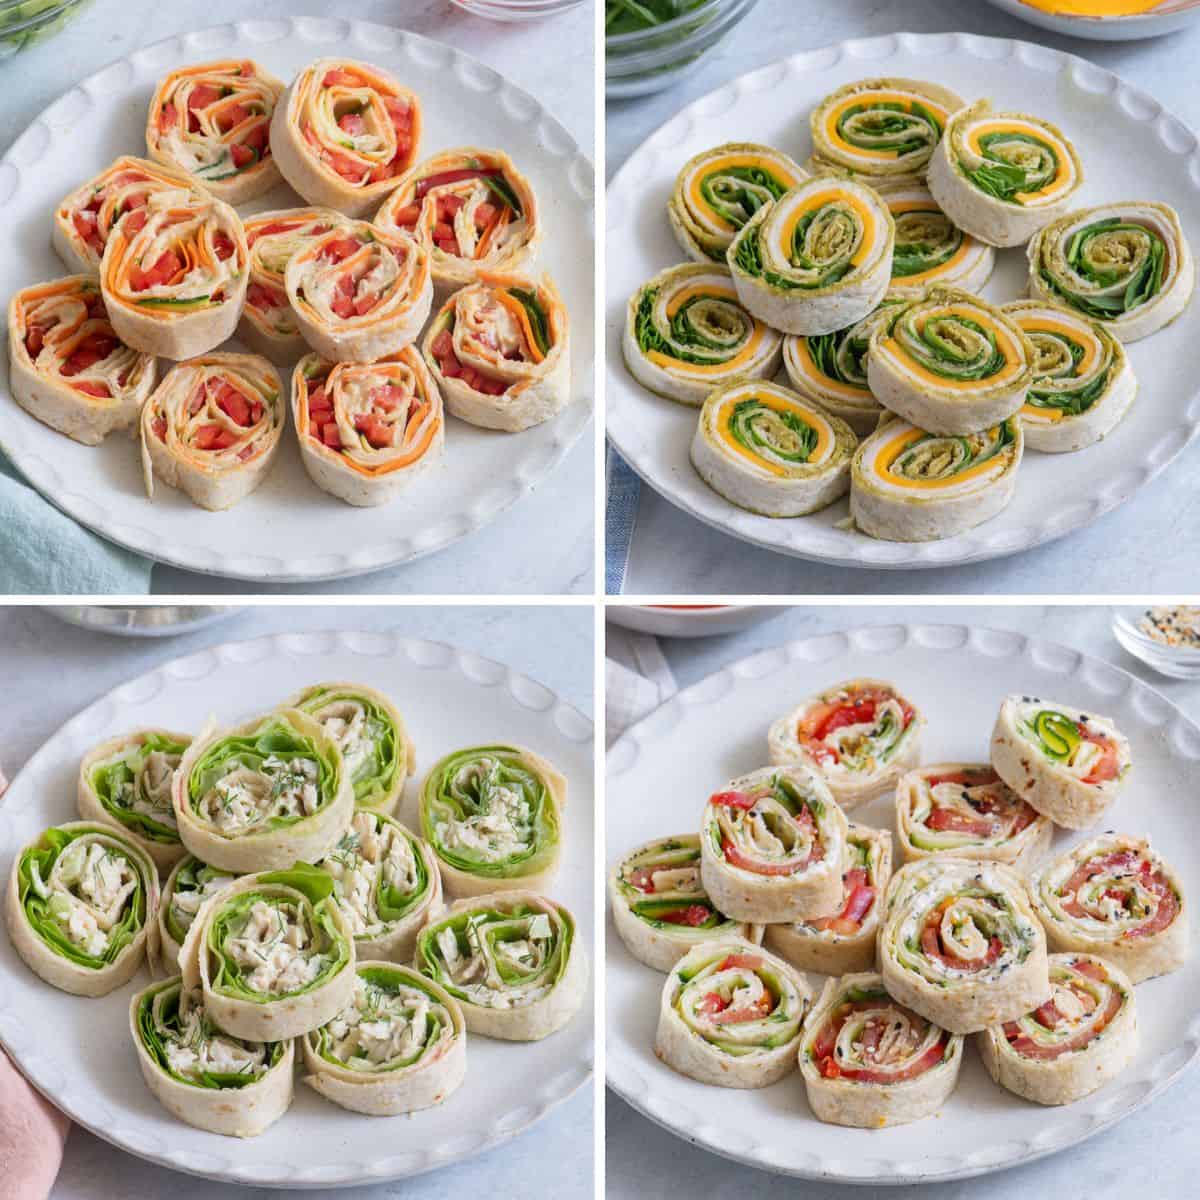 4 image collage of different pinwheel sandwiches on round plates.